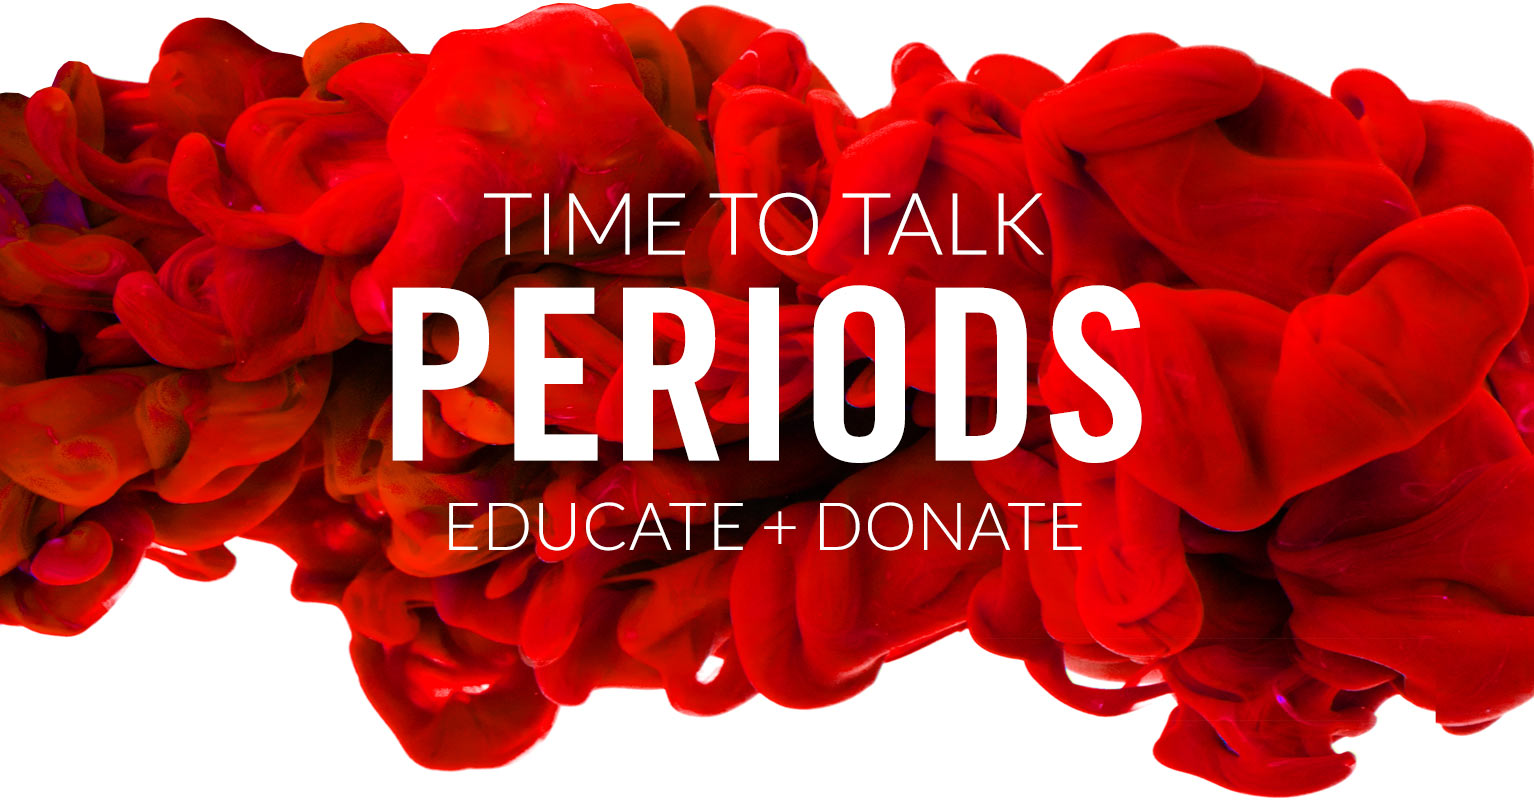 Time to Talk Periods